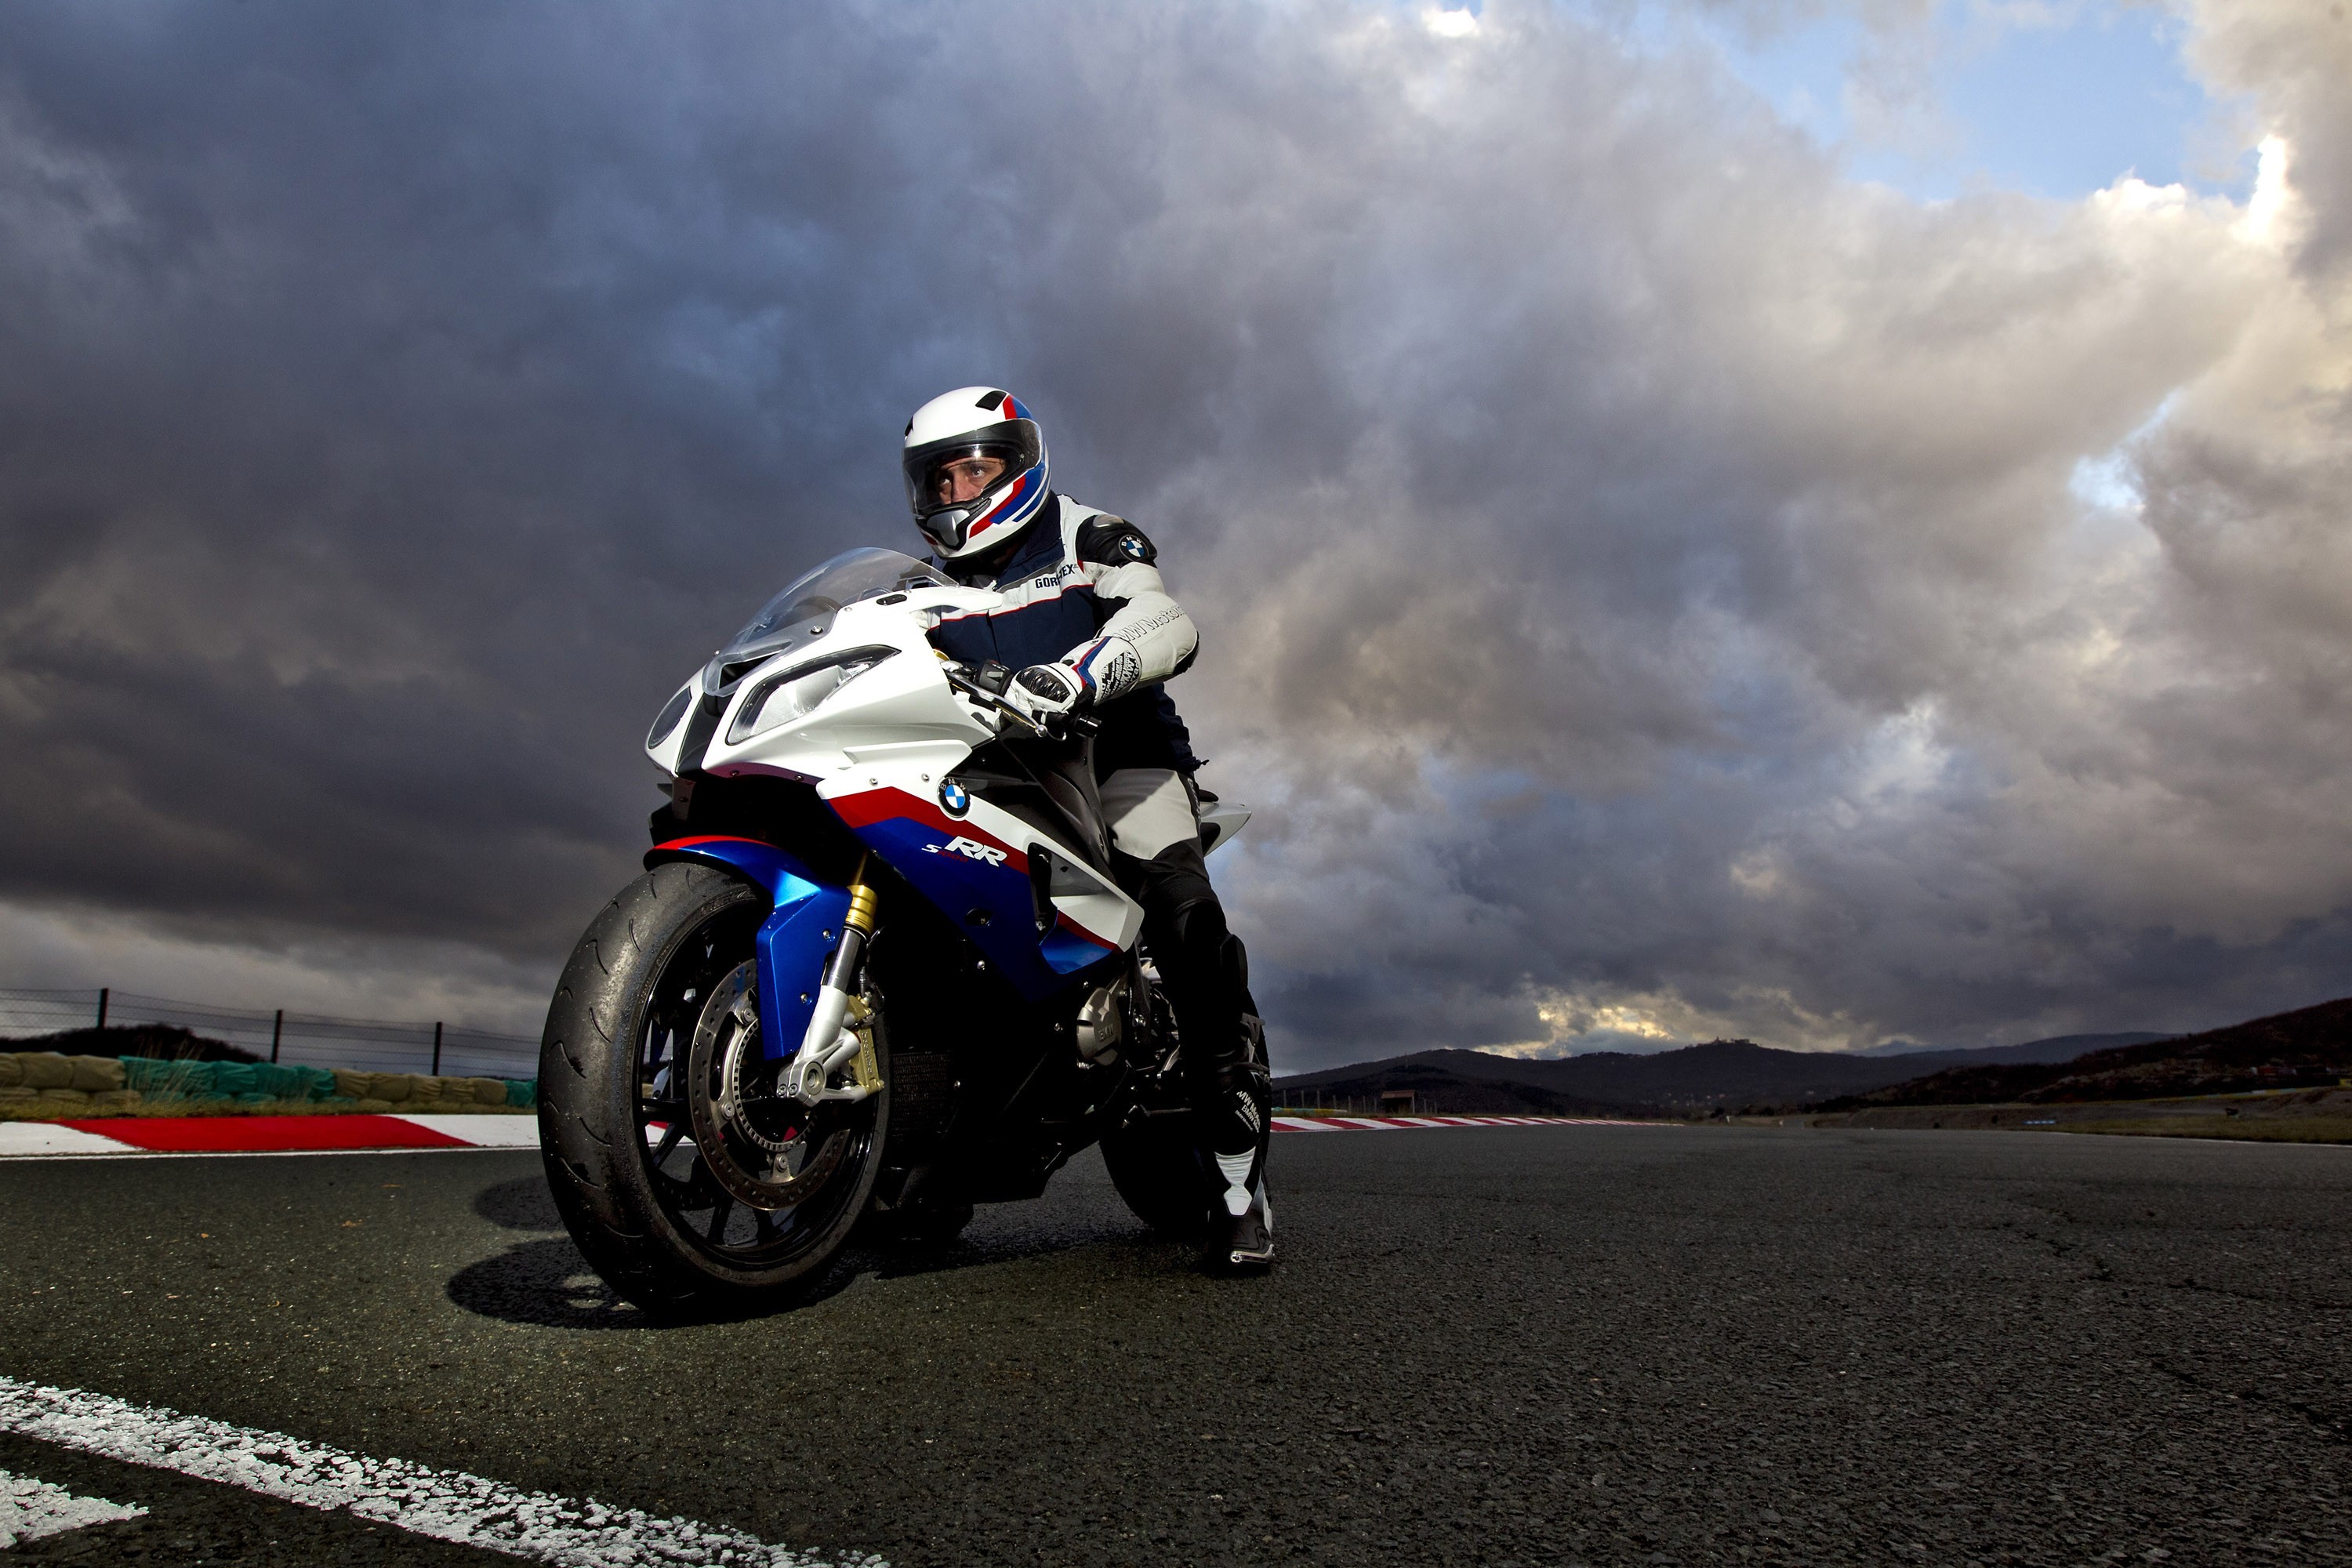 Bmw S1000rr HD Widescreen Wallpaper And Image Car Pictures